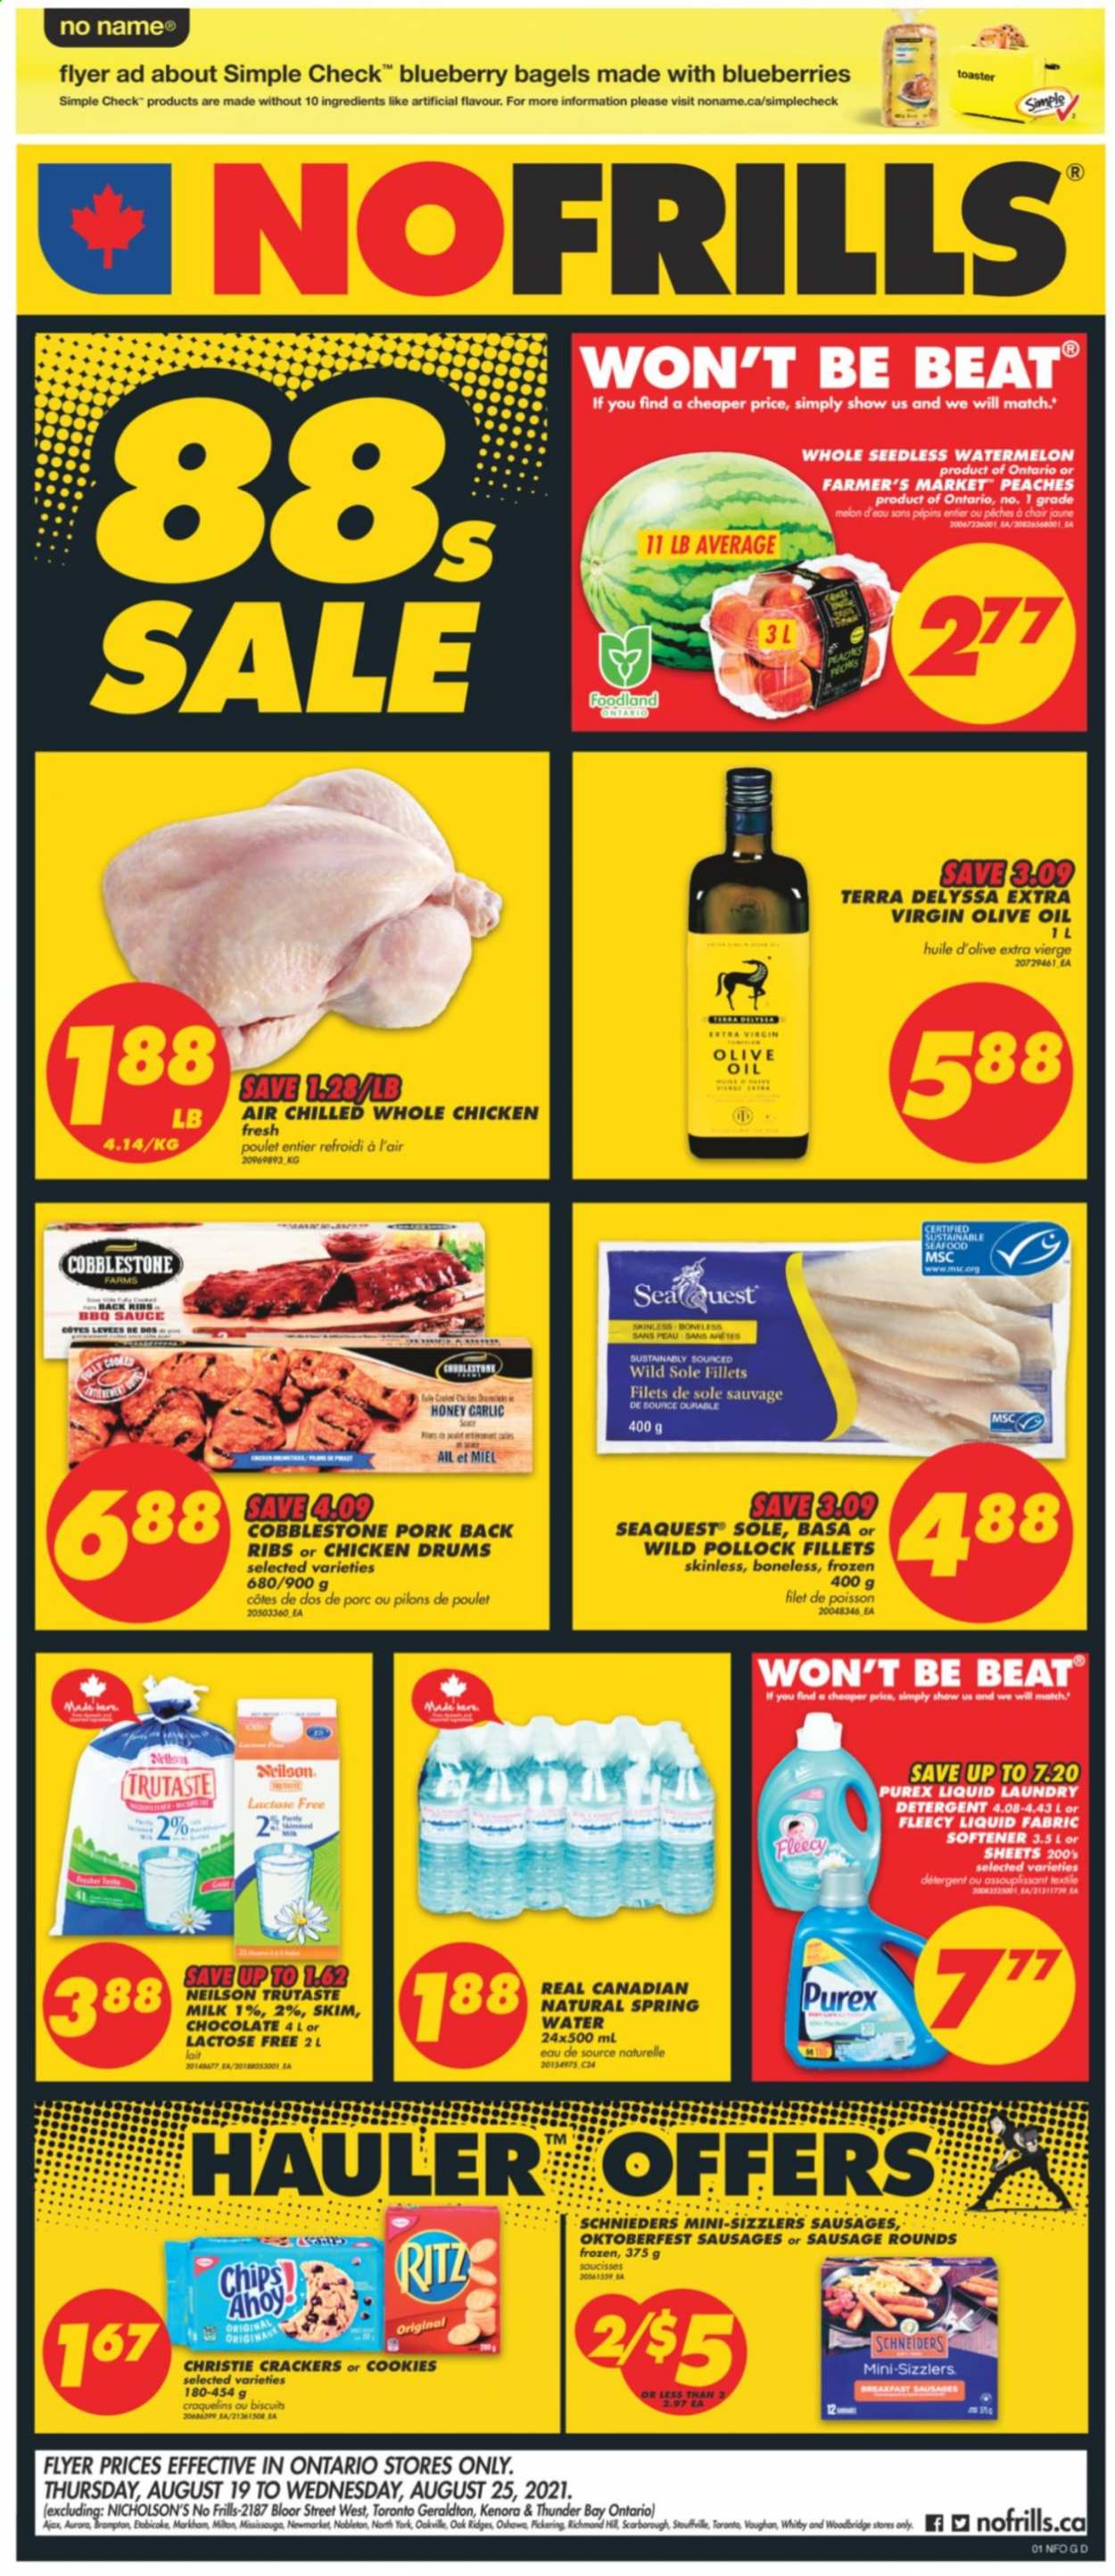 thumbnail - No Frills Flyer - August 19, 2021 - August 25, 2021 - Sales products - bagels, watermelon, melons, peaches, pollock, No Name, sausage, milk, cookies, chocolate, crackers, biscuit, RITZ, BBQ sauce, extra virgin olive oil, olive oil, oil, honey, spring water, Woodbridge, whole chicken, chicken, pork meat, pork ribs, pork back ribs, Ajax, fabric softener, laundry detergent, Purex, chair, toaster. Page 1.